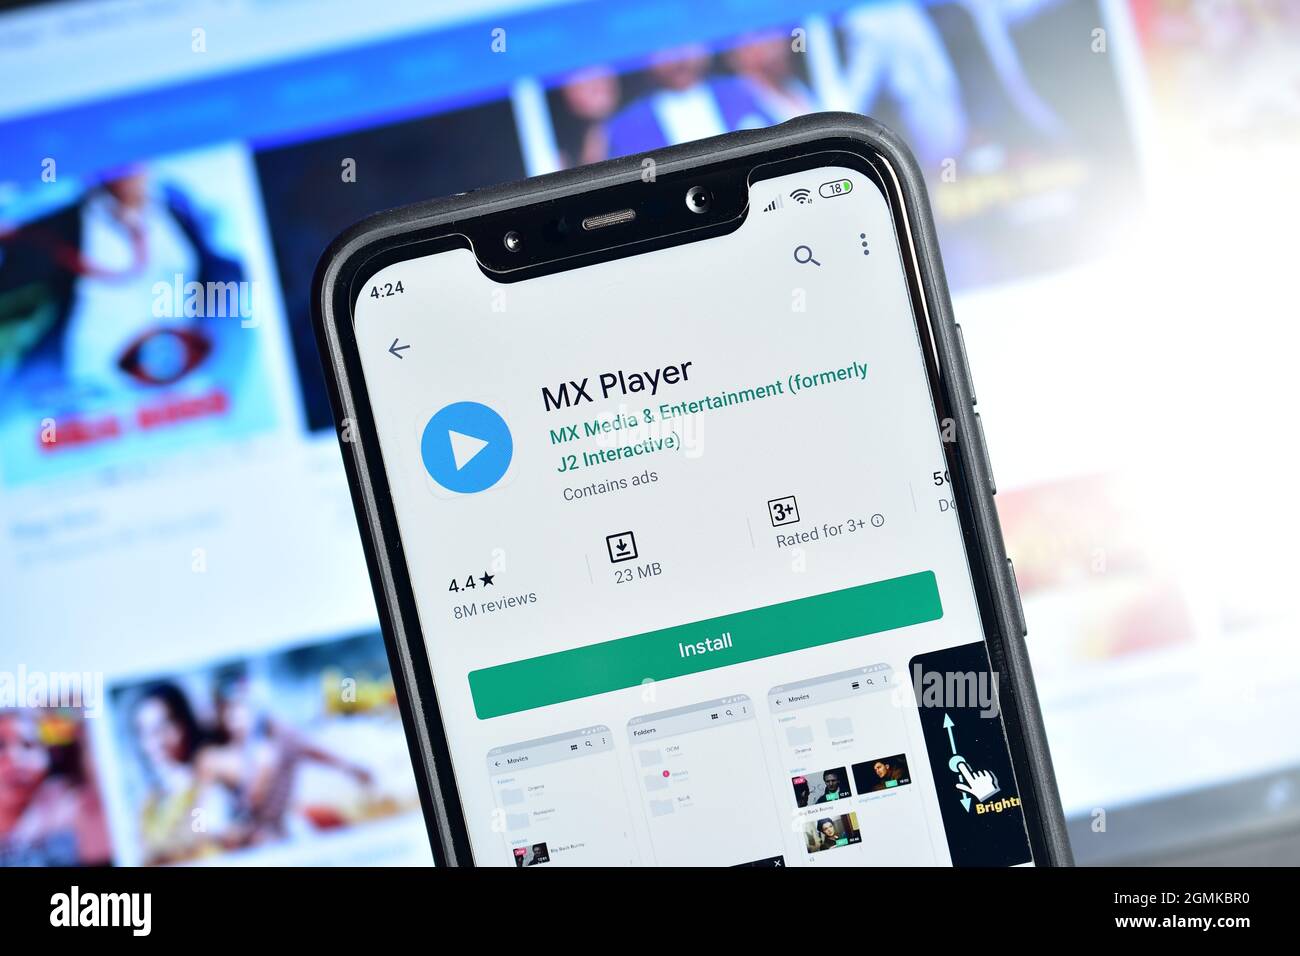 New Delhi, India - February 10, 2020: Indian video streaming app mx player, mx player app on smartphone Stock Photo